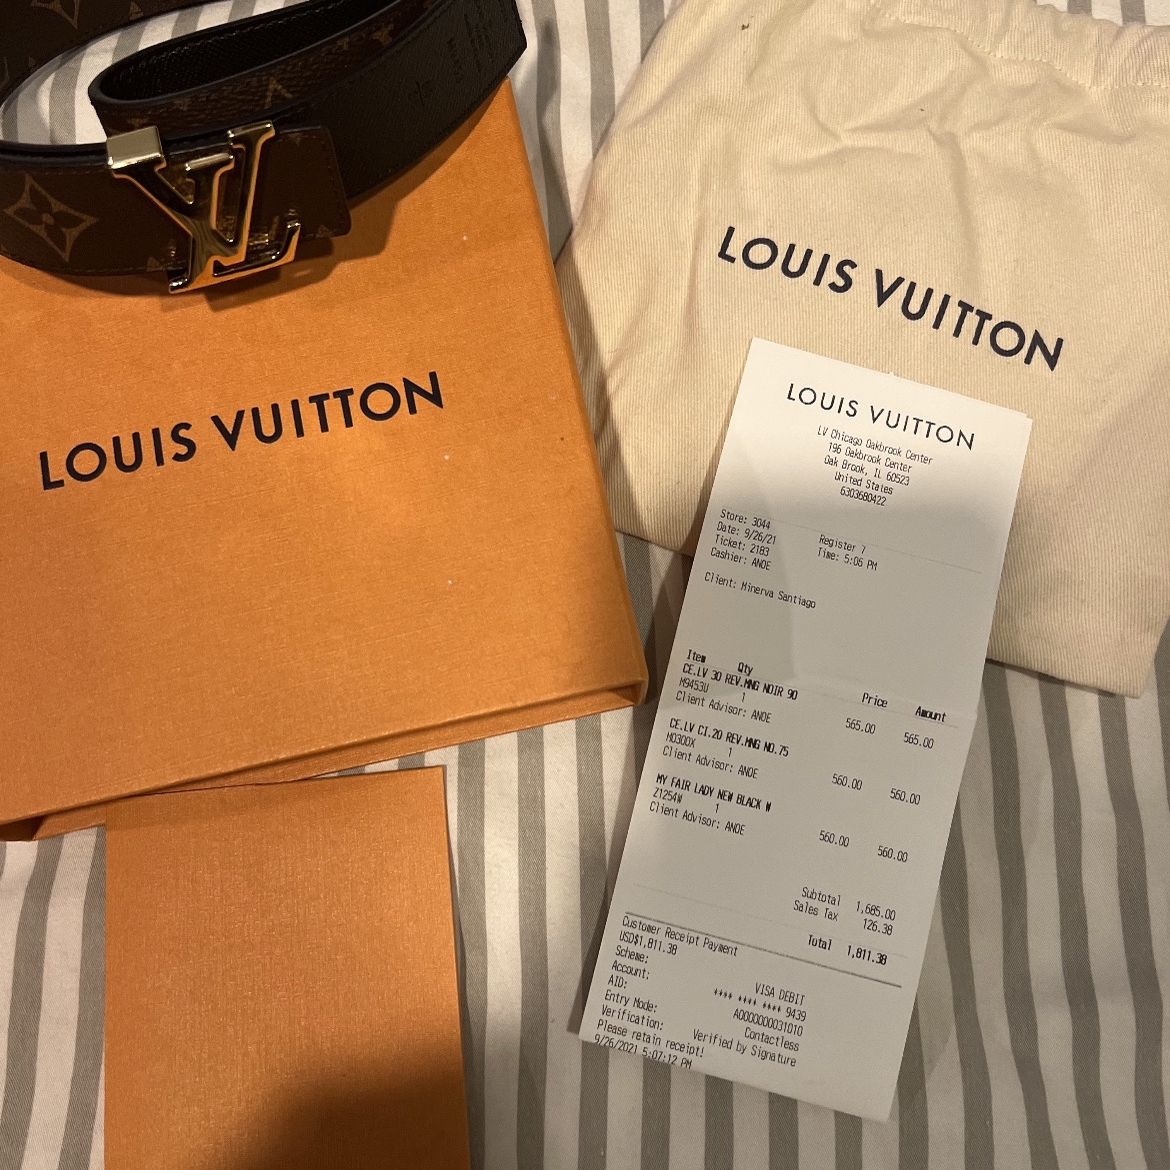 Louis Vuitton Wallets for sale in Maywood, Illinois